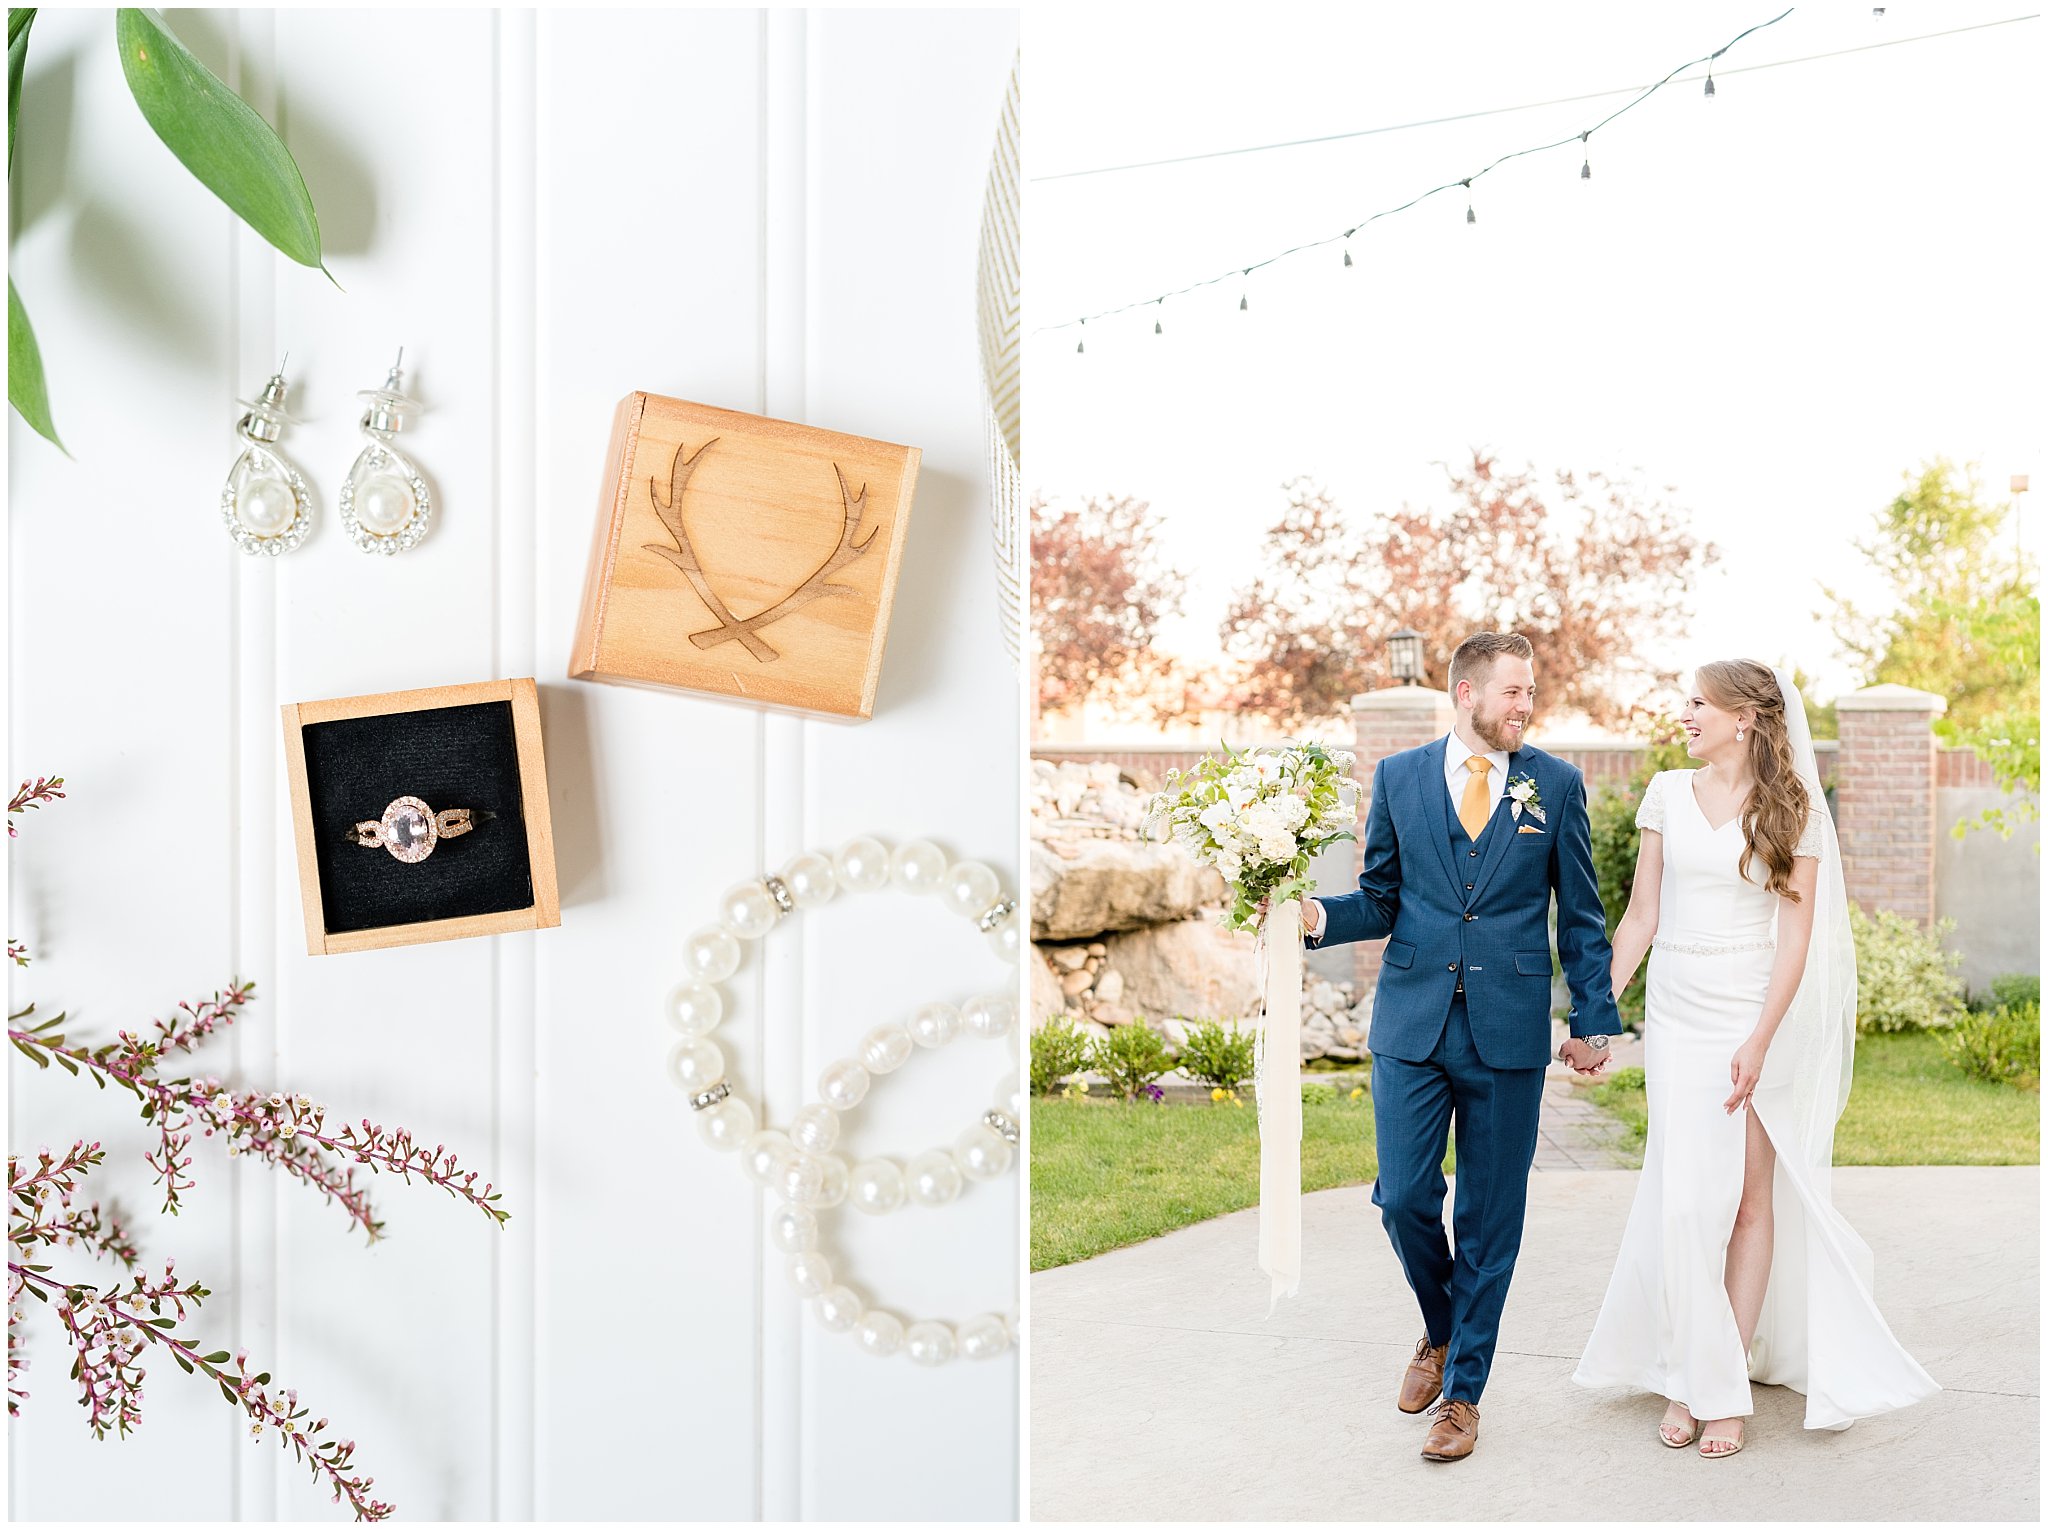 Talia Event Center wedding | Bride and groom walking | Wedding details and rings | Jessie and Dallin Photography